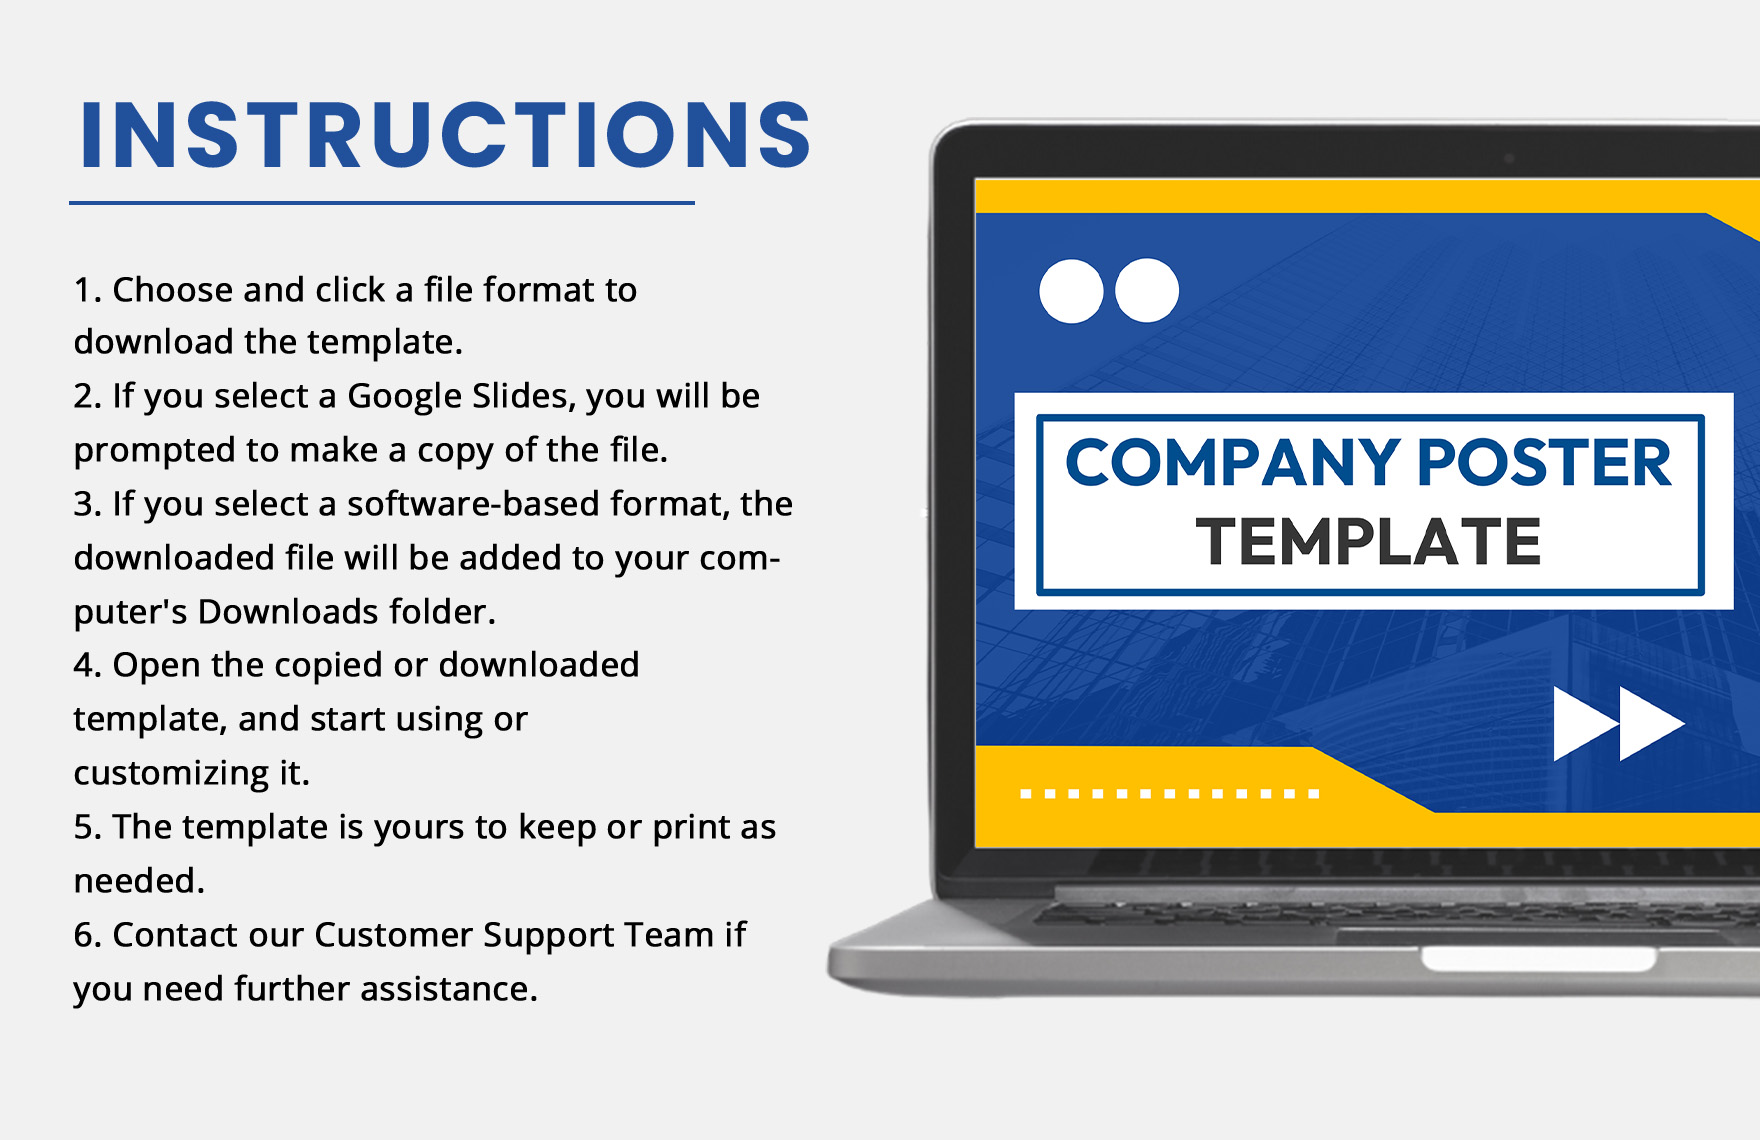 Company Poster Template